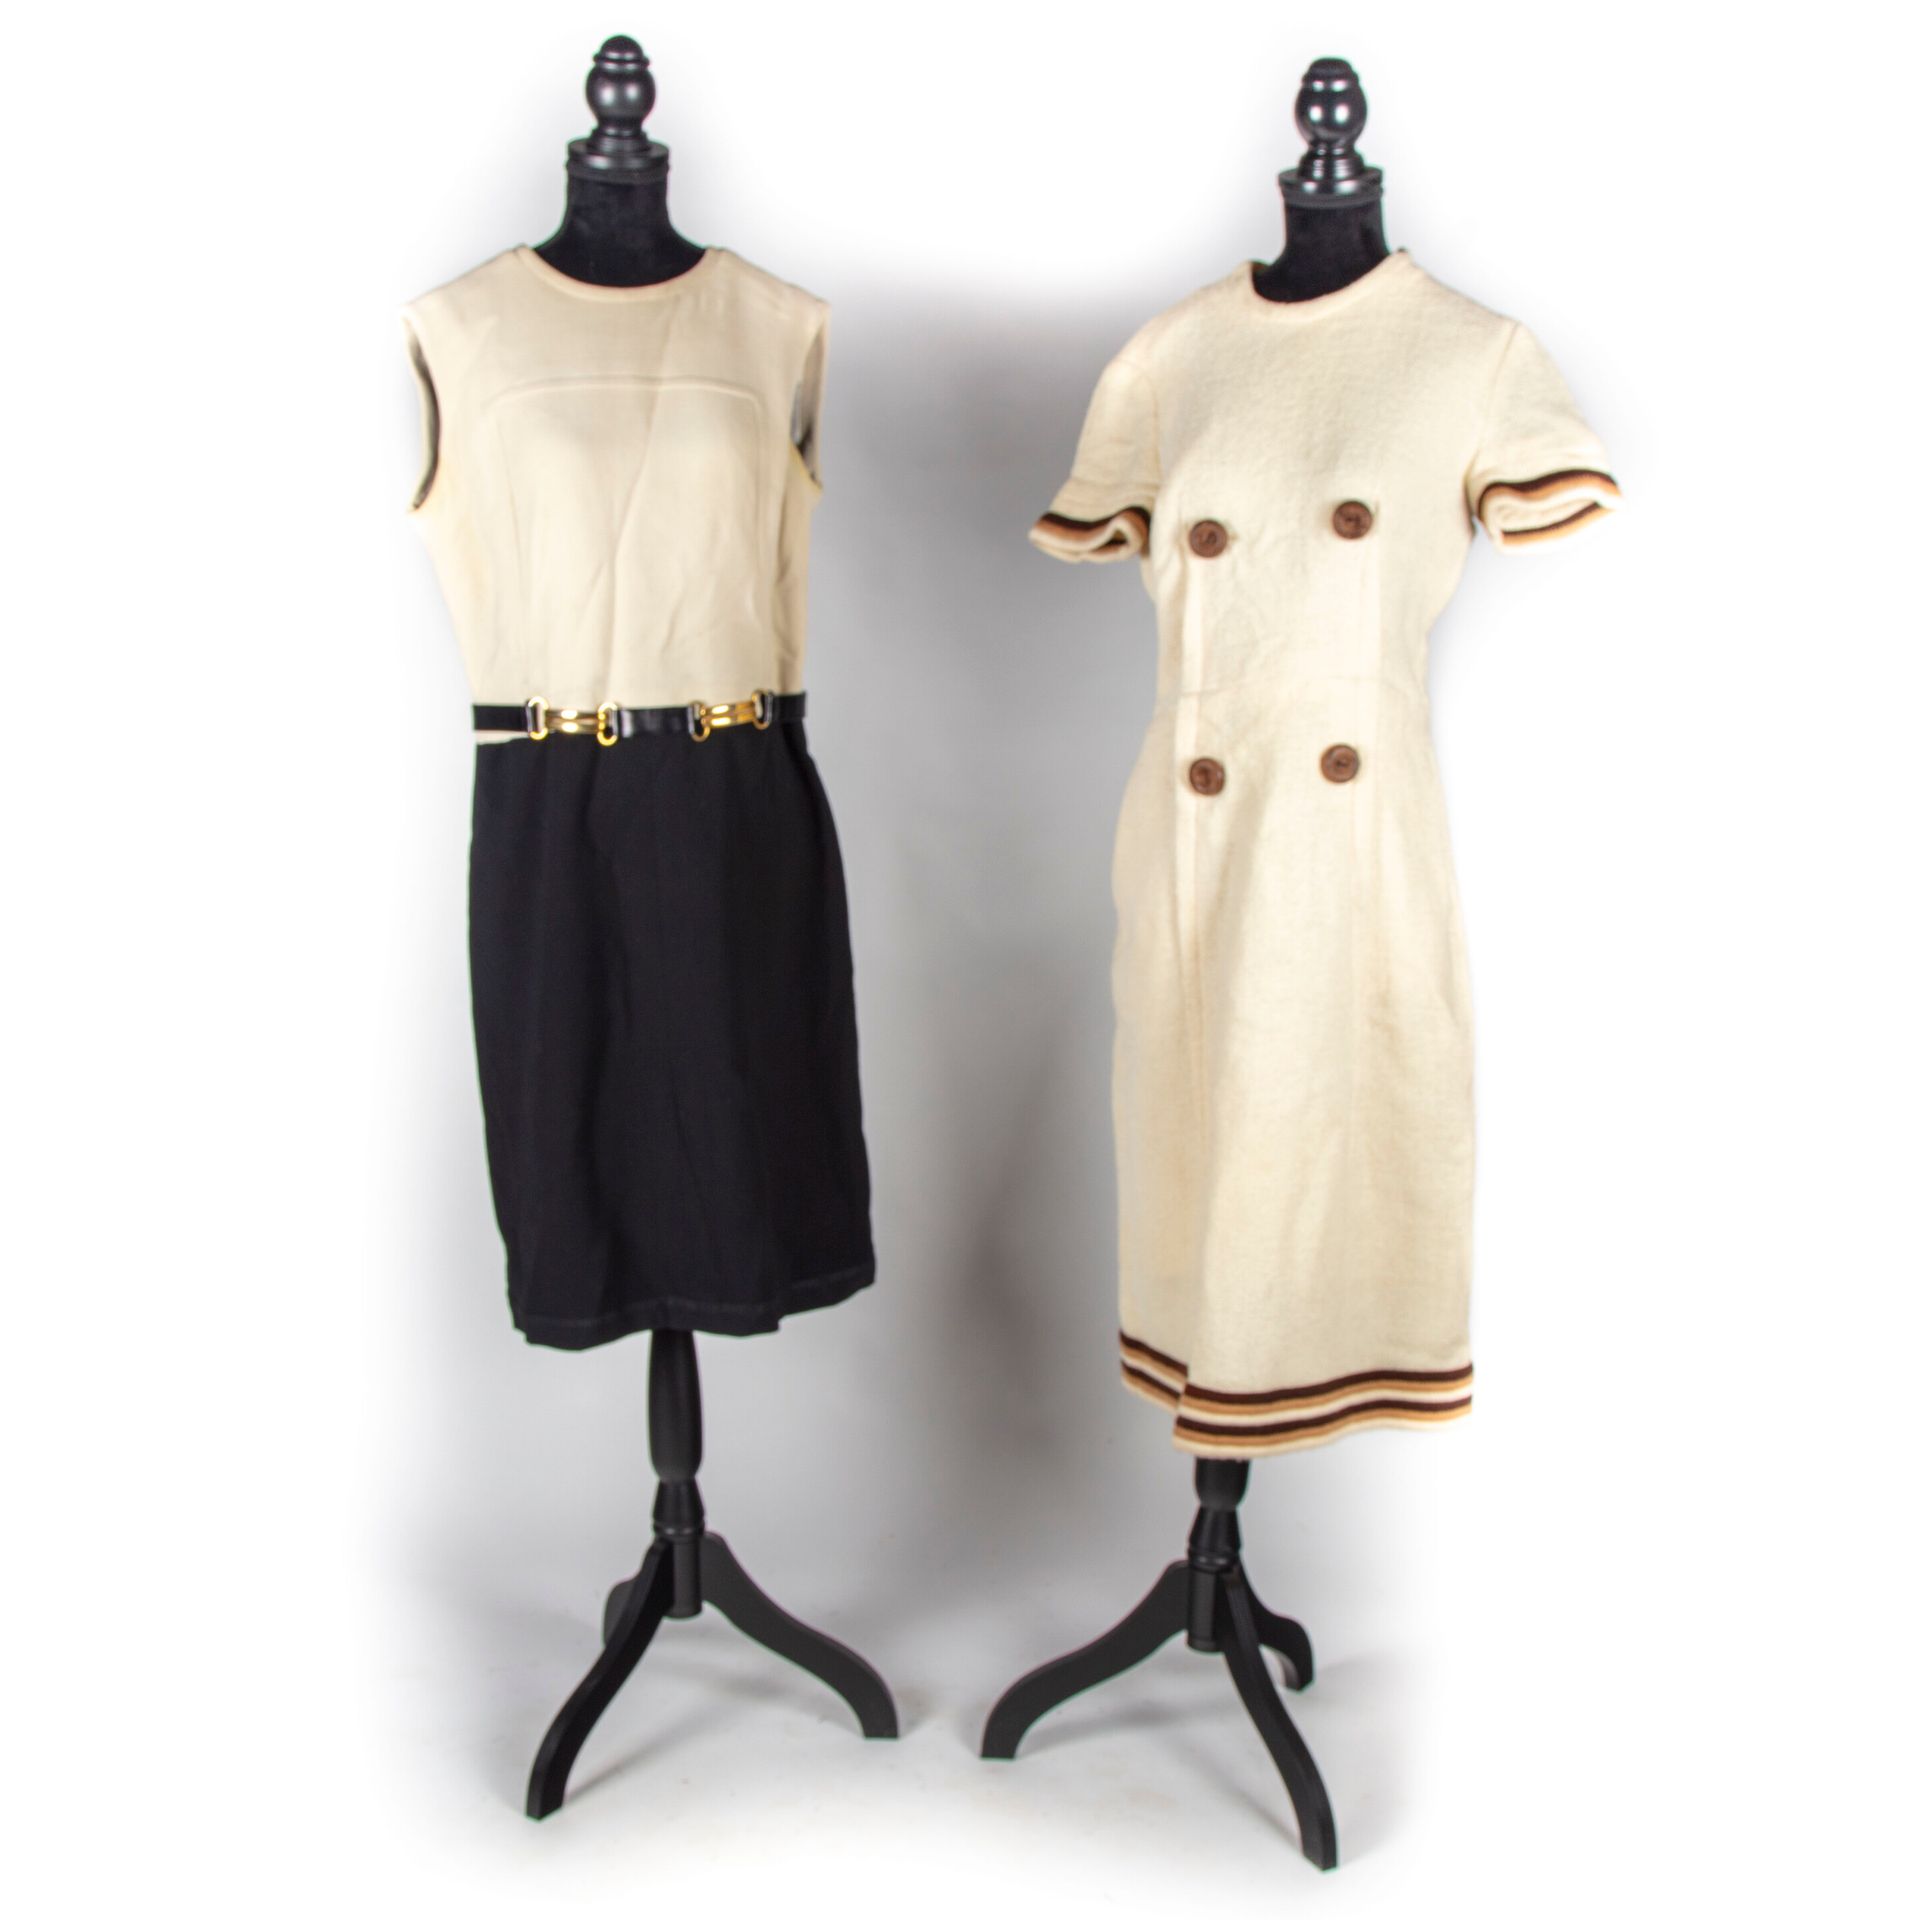 Null Pierre BALMAIN - Paris 

Two day dresses - 60's :

A cream-colored wool dre&hellip;